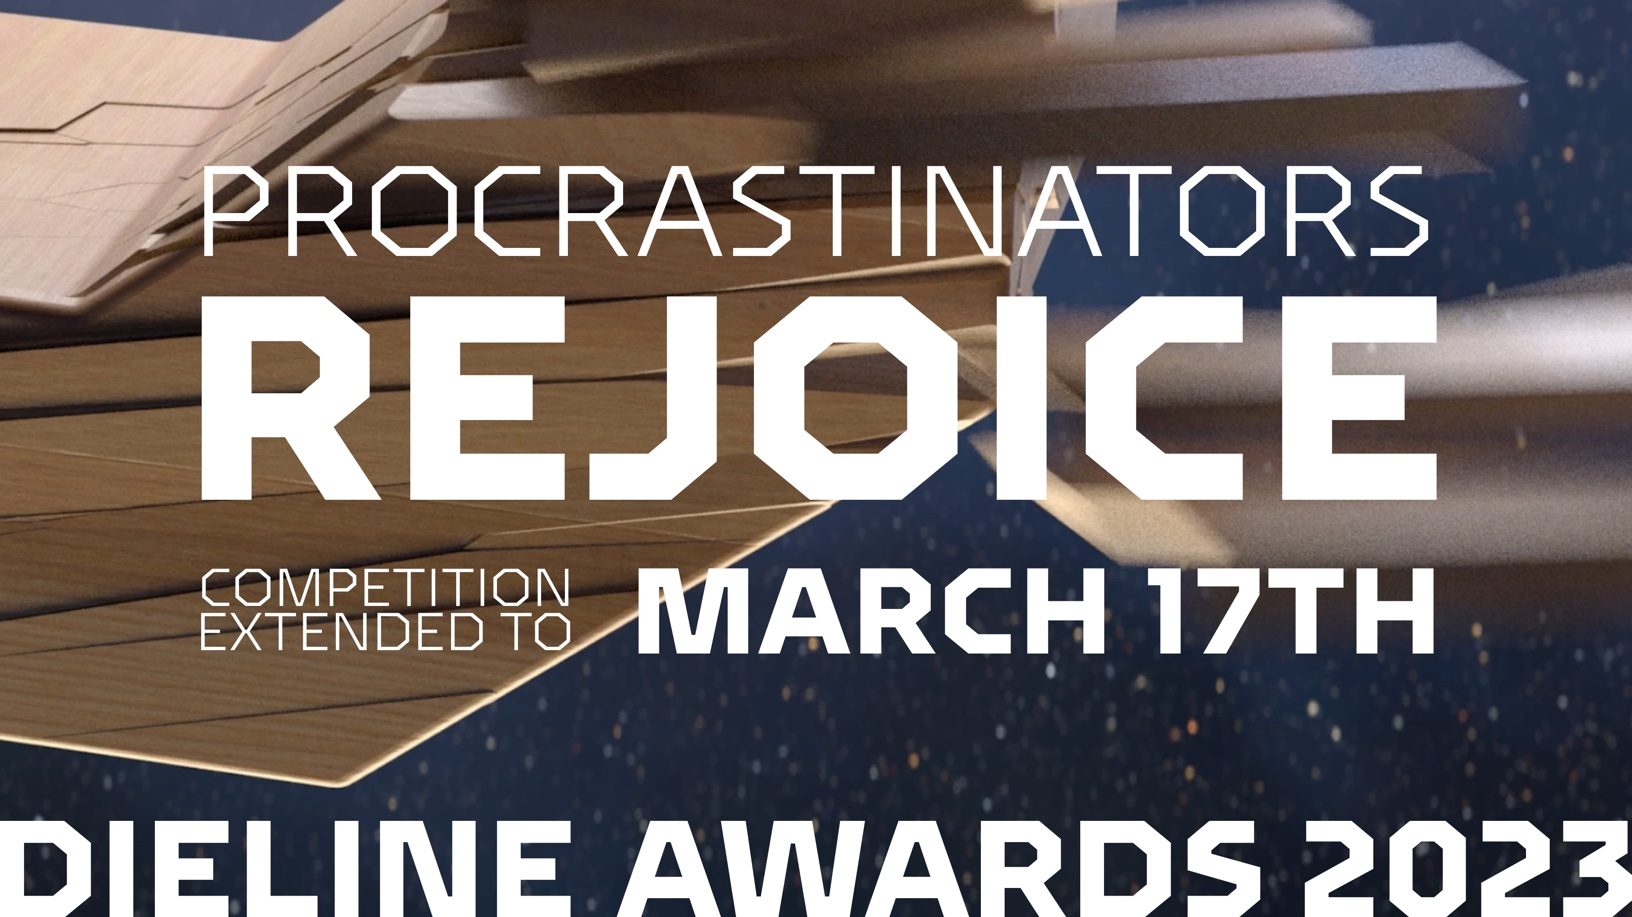 Need More Time to Enter Dieline Awards?